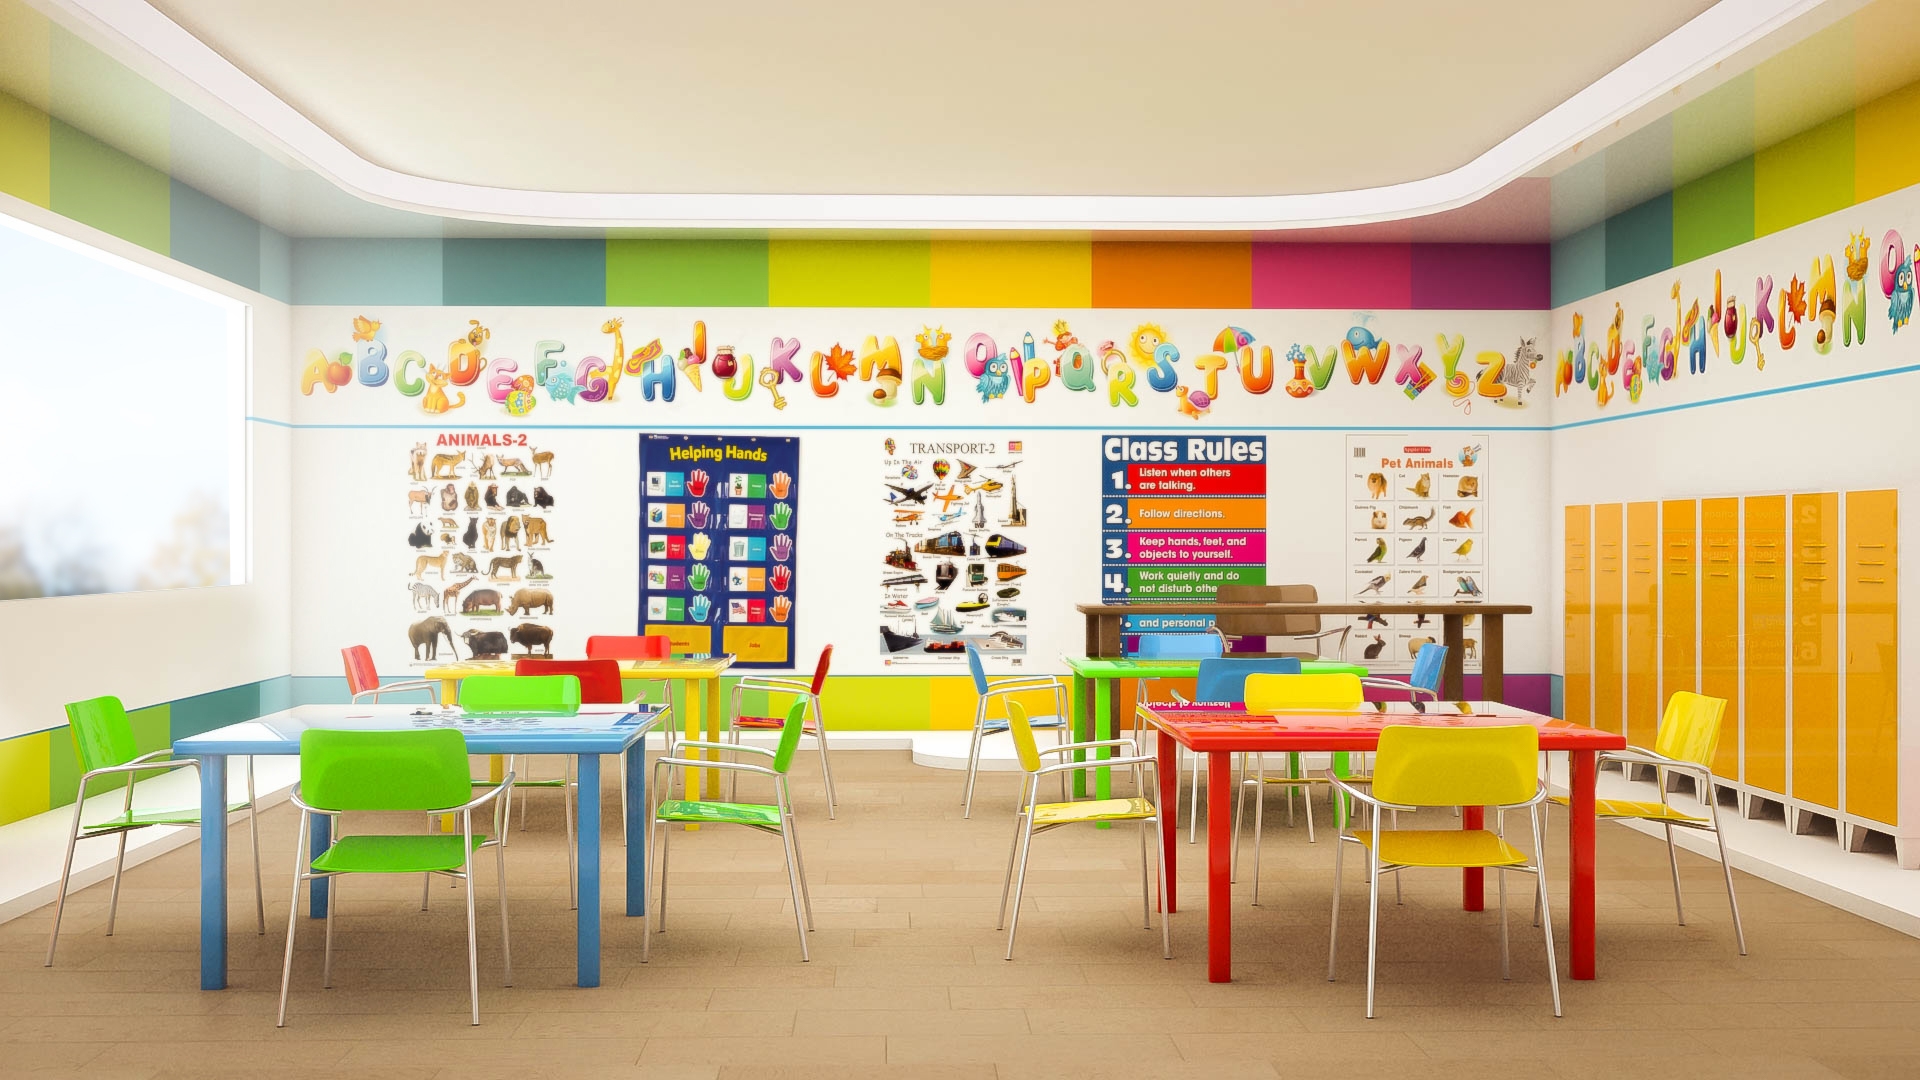 The importance of age-appropriate childcare classroom design